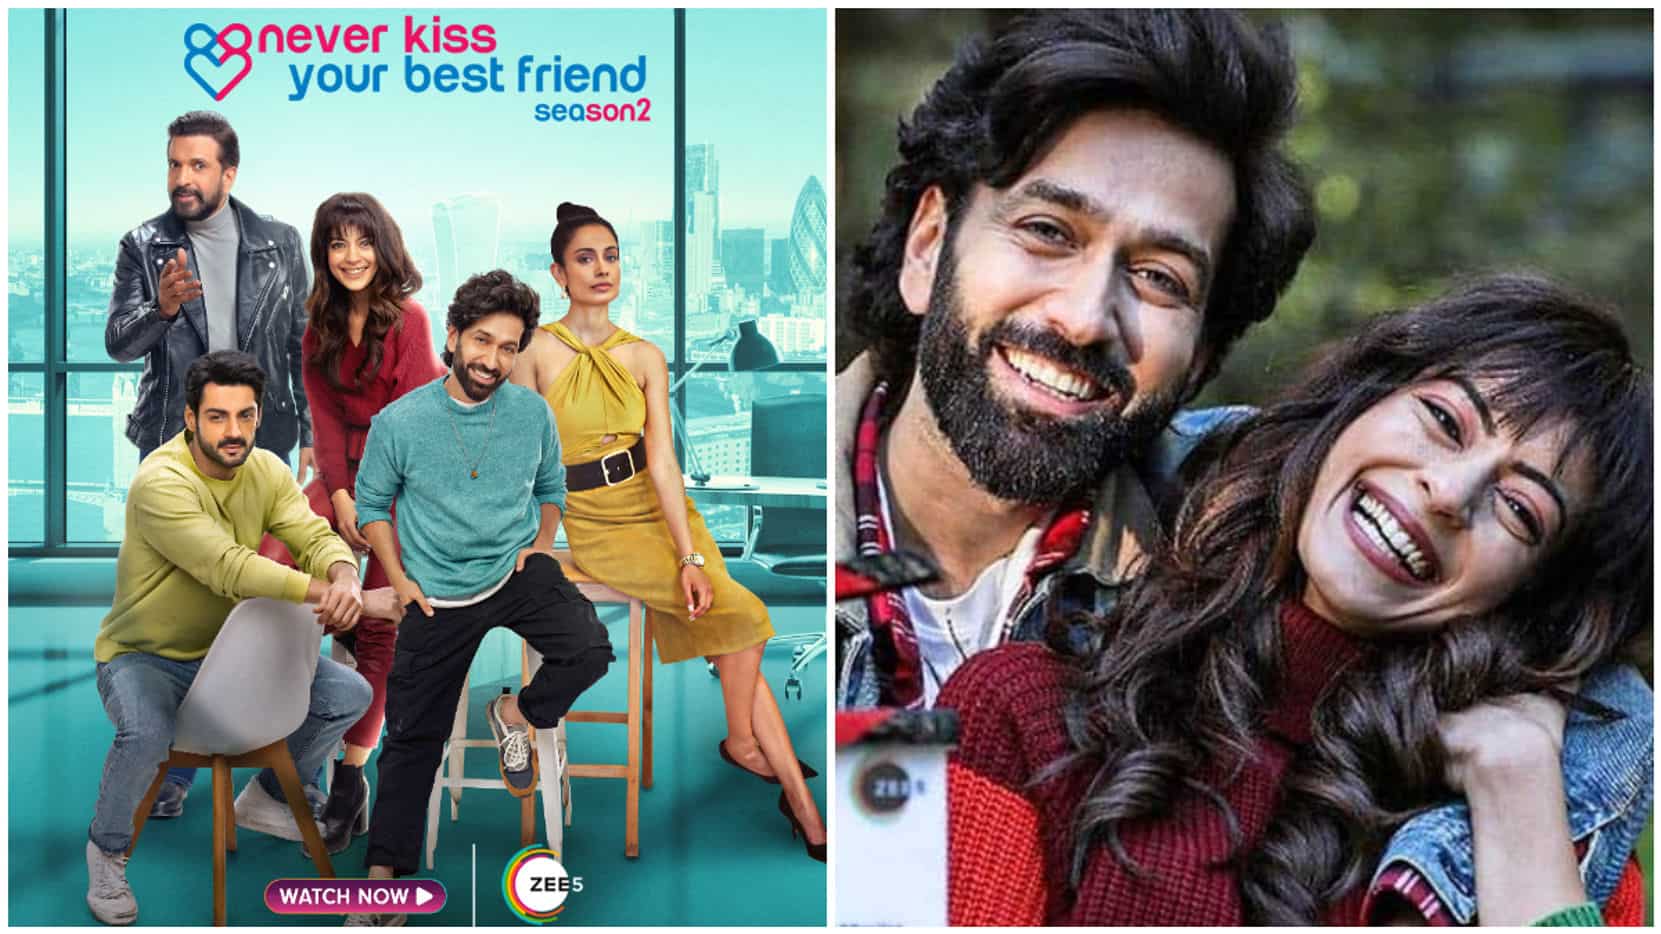 https://www.mobilemasala.com/movies/2-years-of-Never-Kiss-Your-Best-Friend-Season-2-Nakuul-Mehta-Karan-Wahi-and-more-pen-lovely-messages-i258800